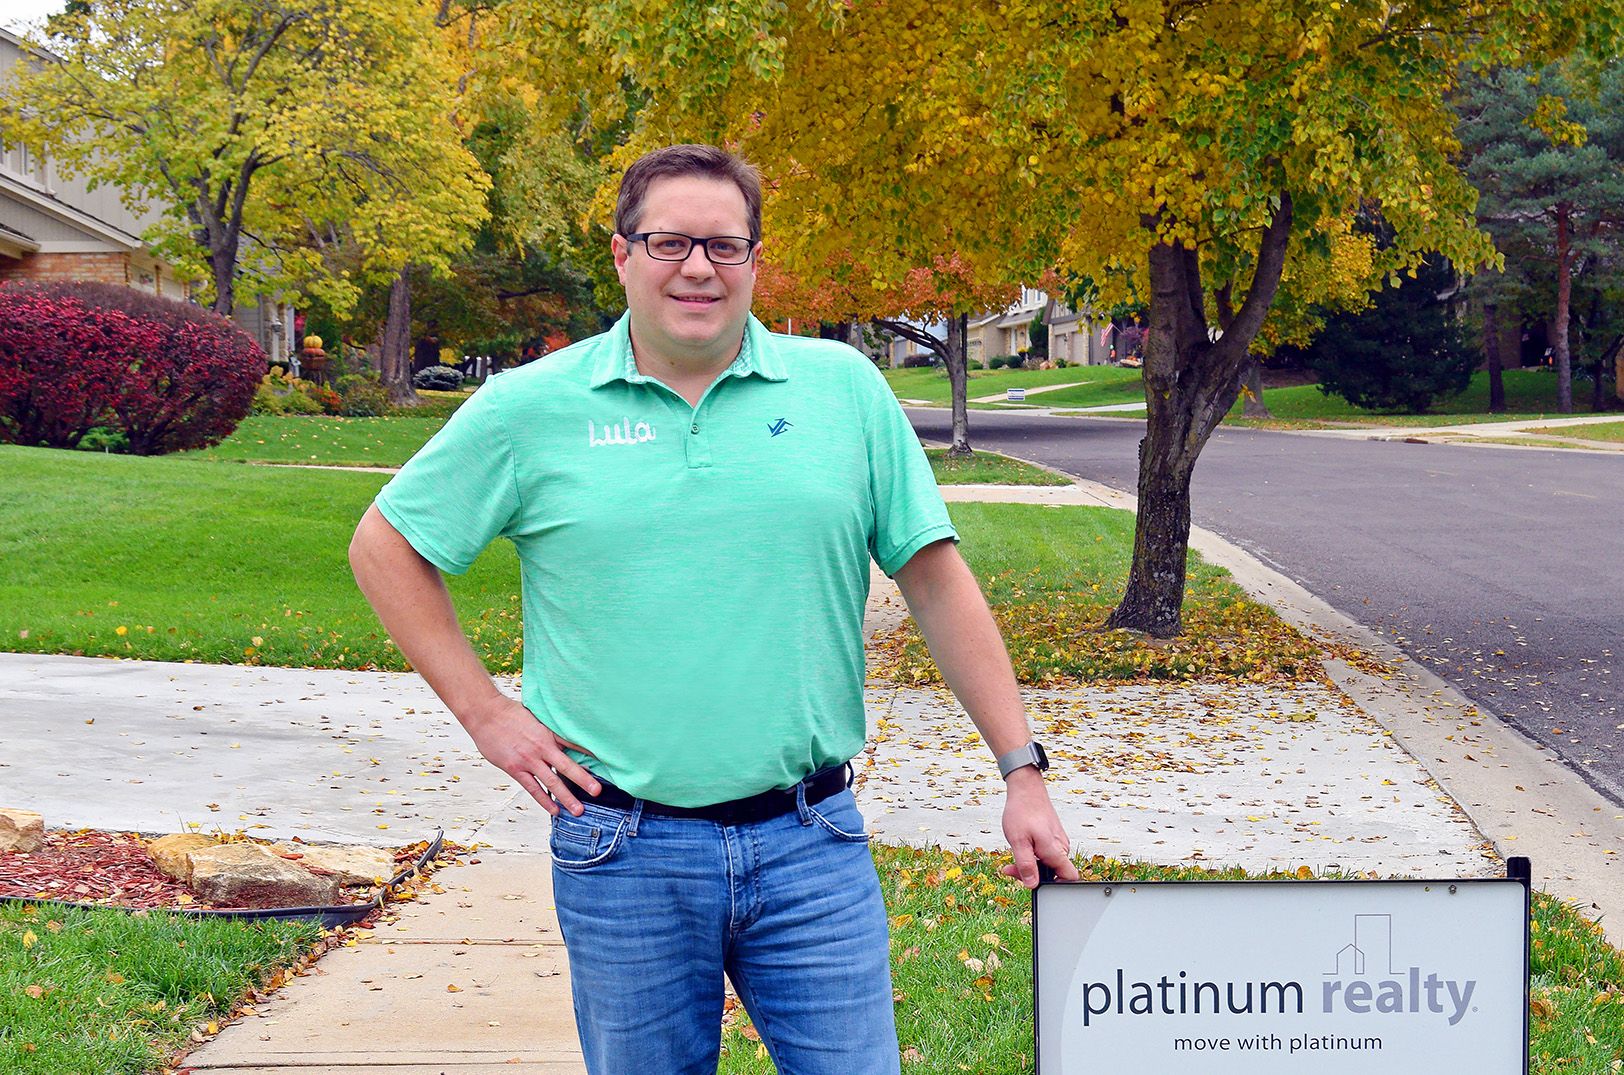 Lula partners with Platinum Realty to help home buyers, sellers find quality contractors